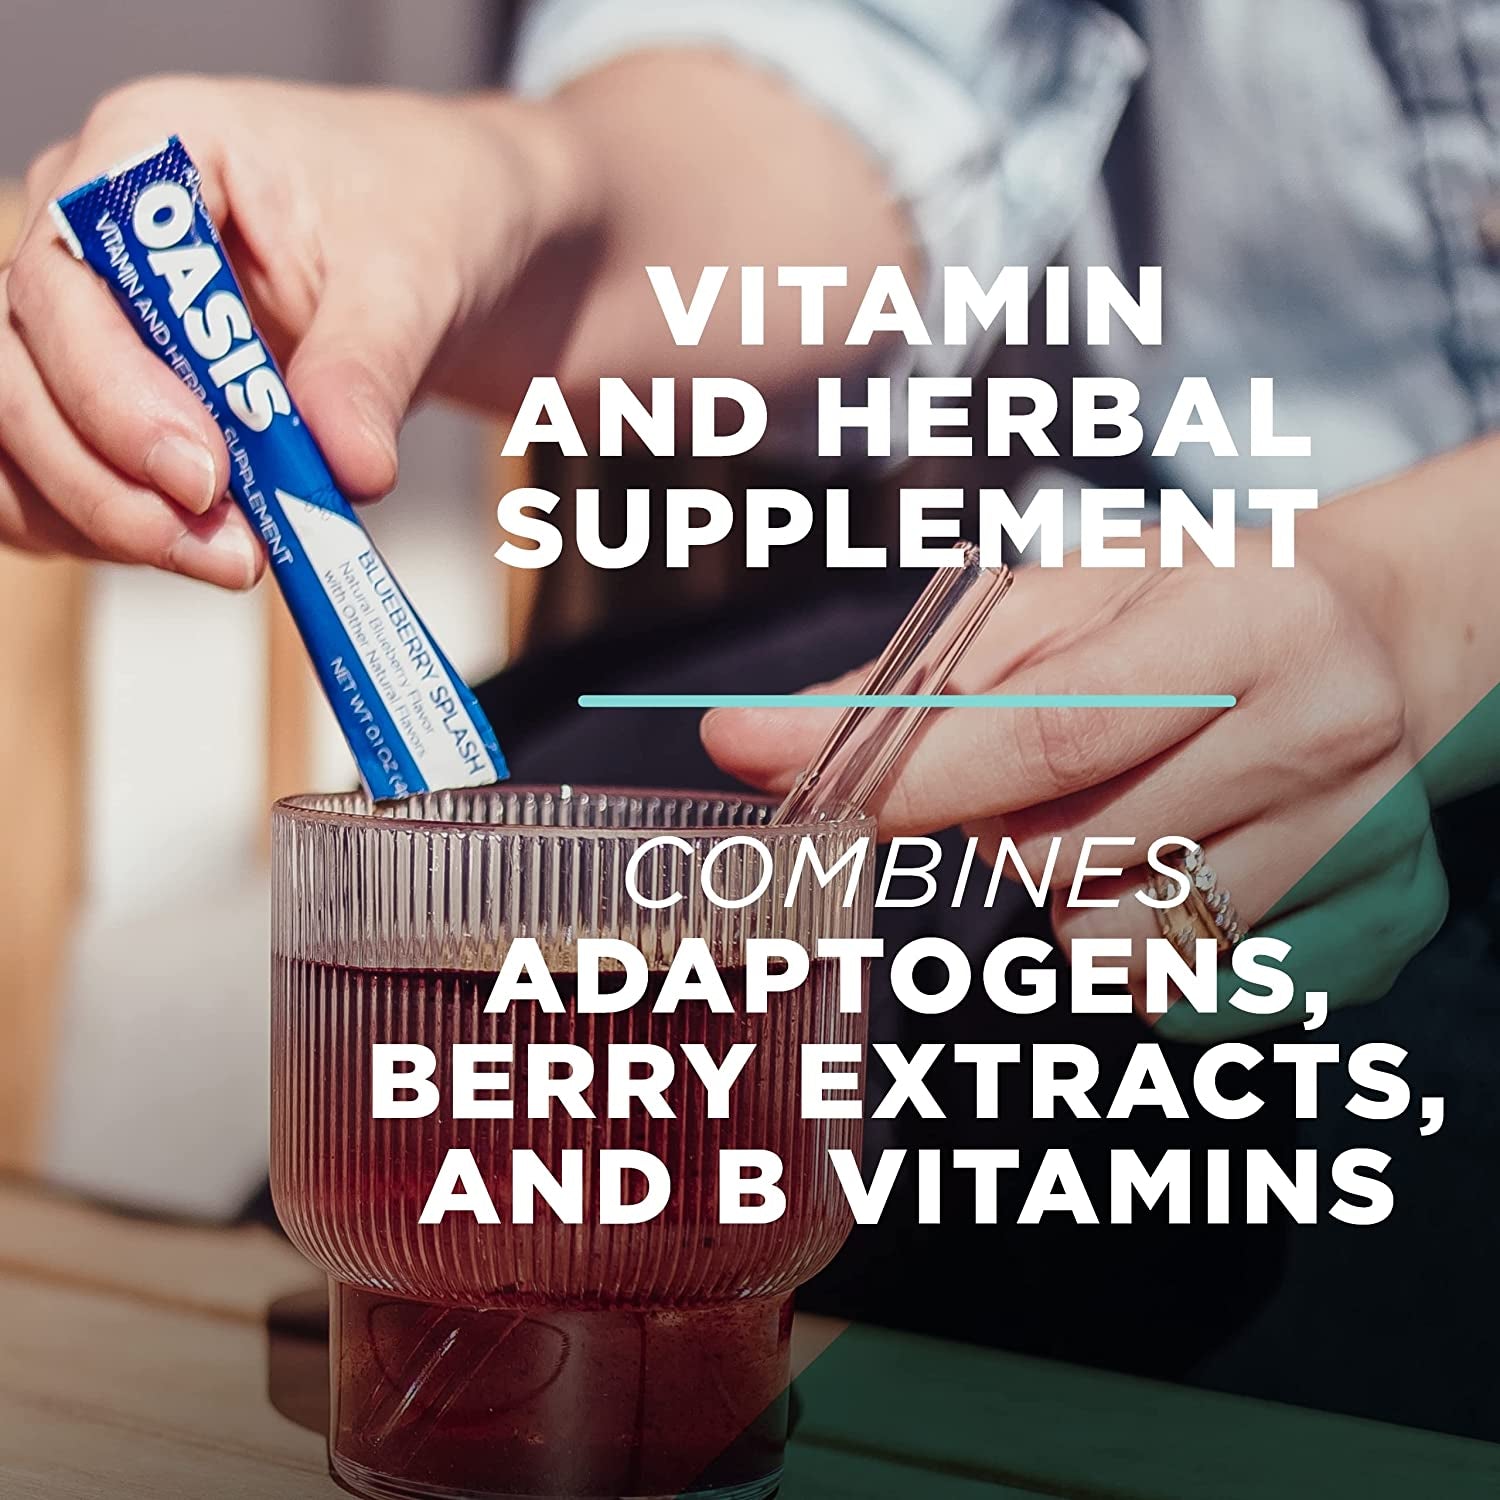 Advocare Oasis Vitamin & Herbal Supplement - for Immune & Cognitive Support - Quality Drink Mix Packets - Powdered Drink Mix Packets - Water Drink Mix Packets - Blueberry Splash - 14 Stick Packs